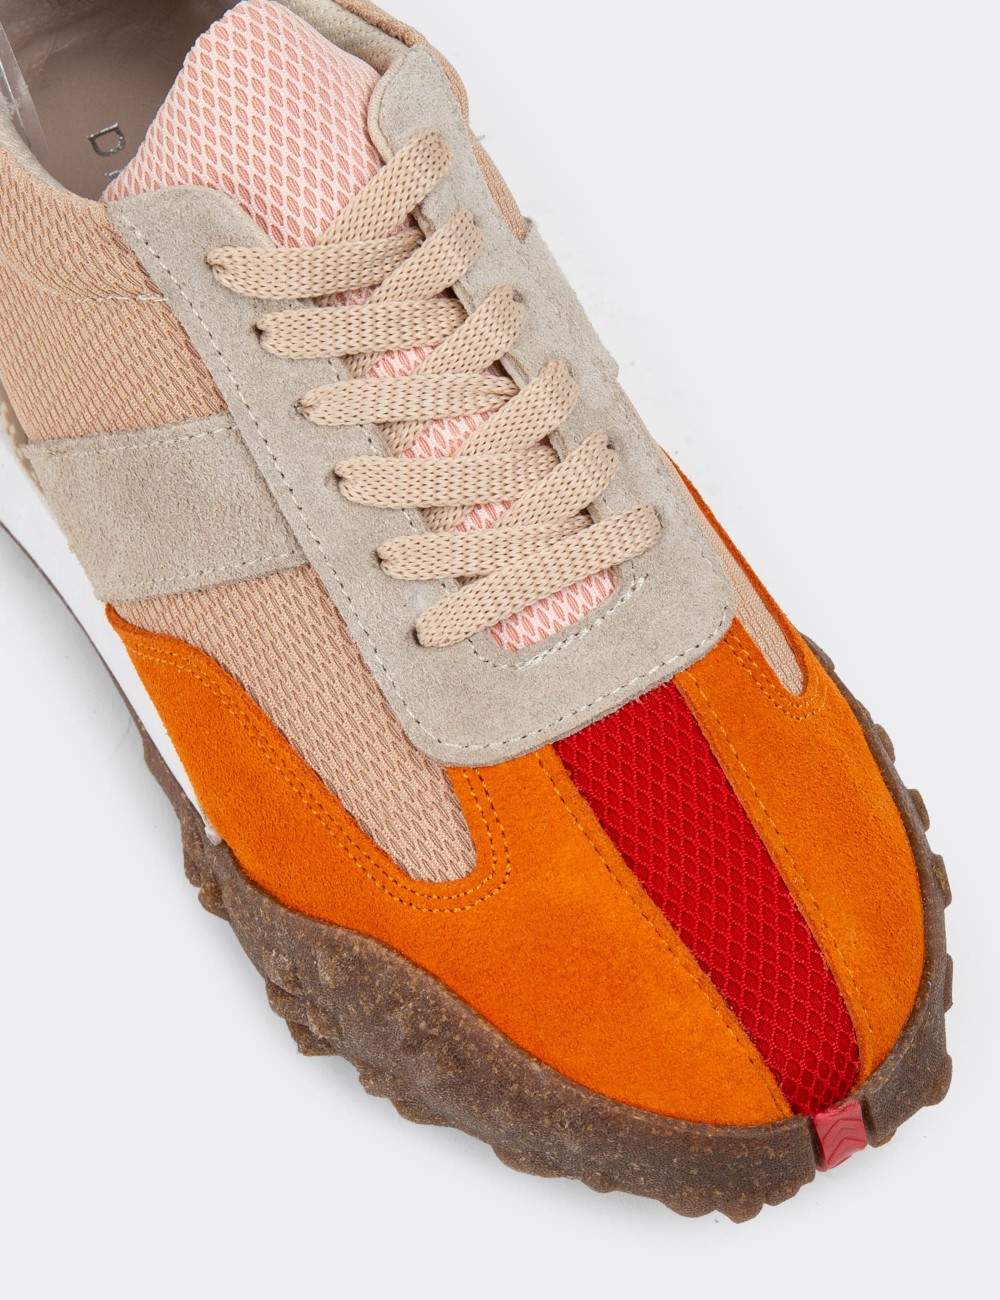 Orange Suede Leather Sneakers - R3501ZTRCC01